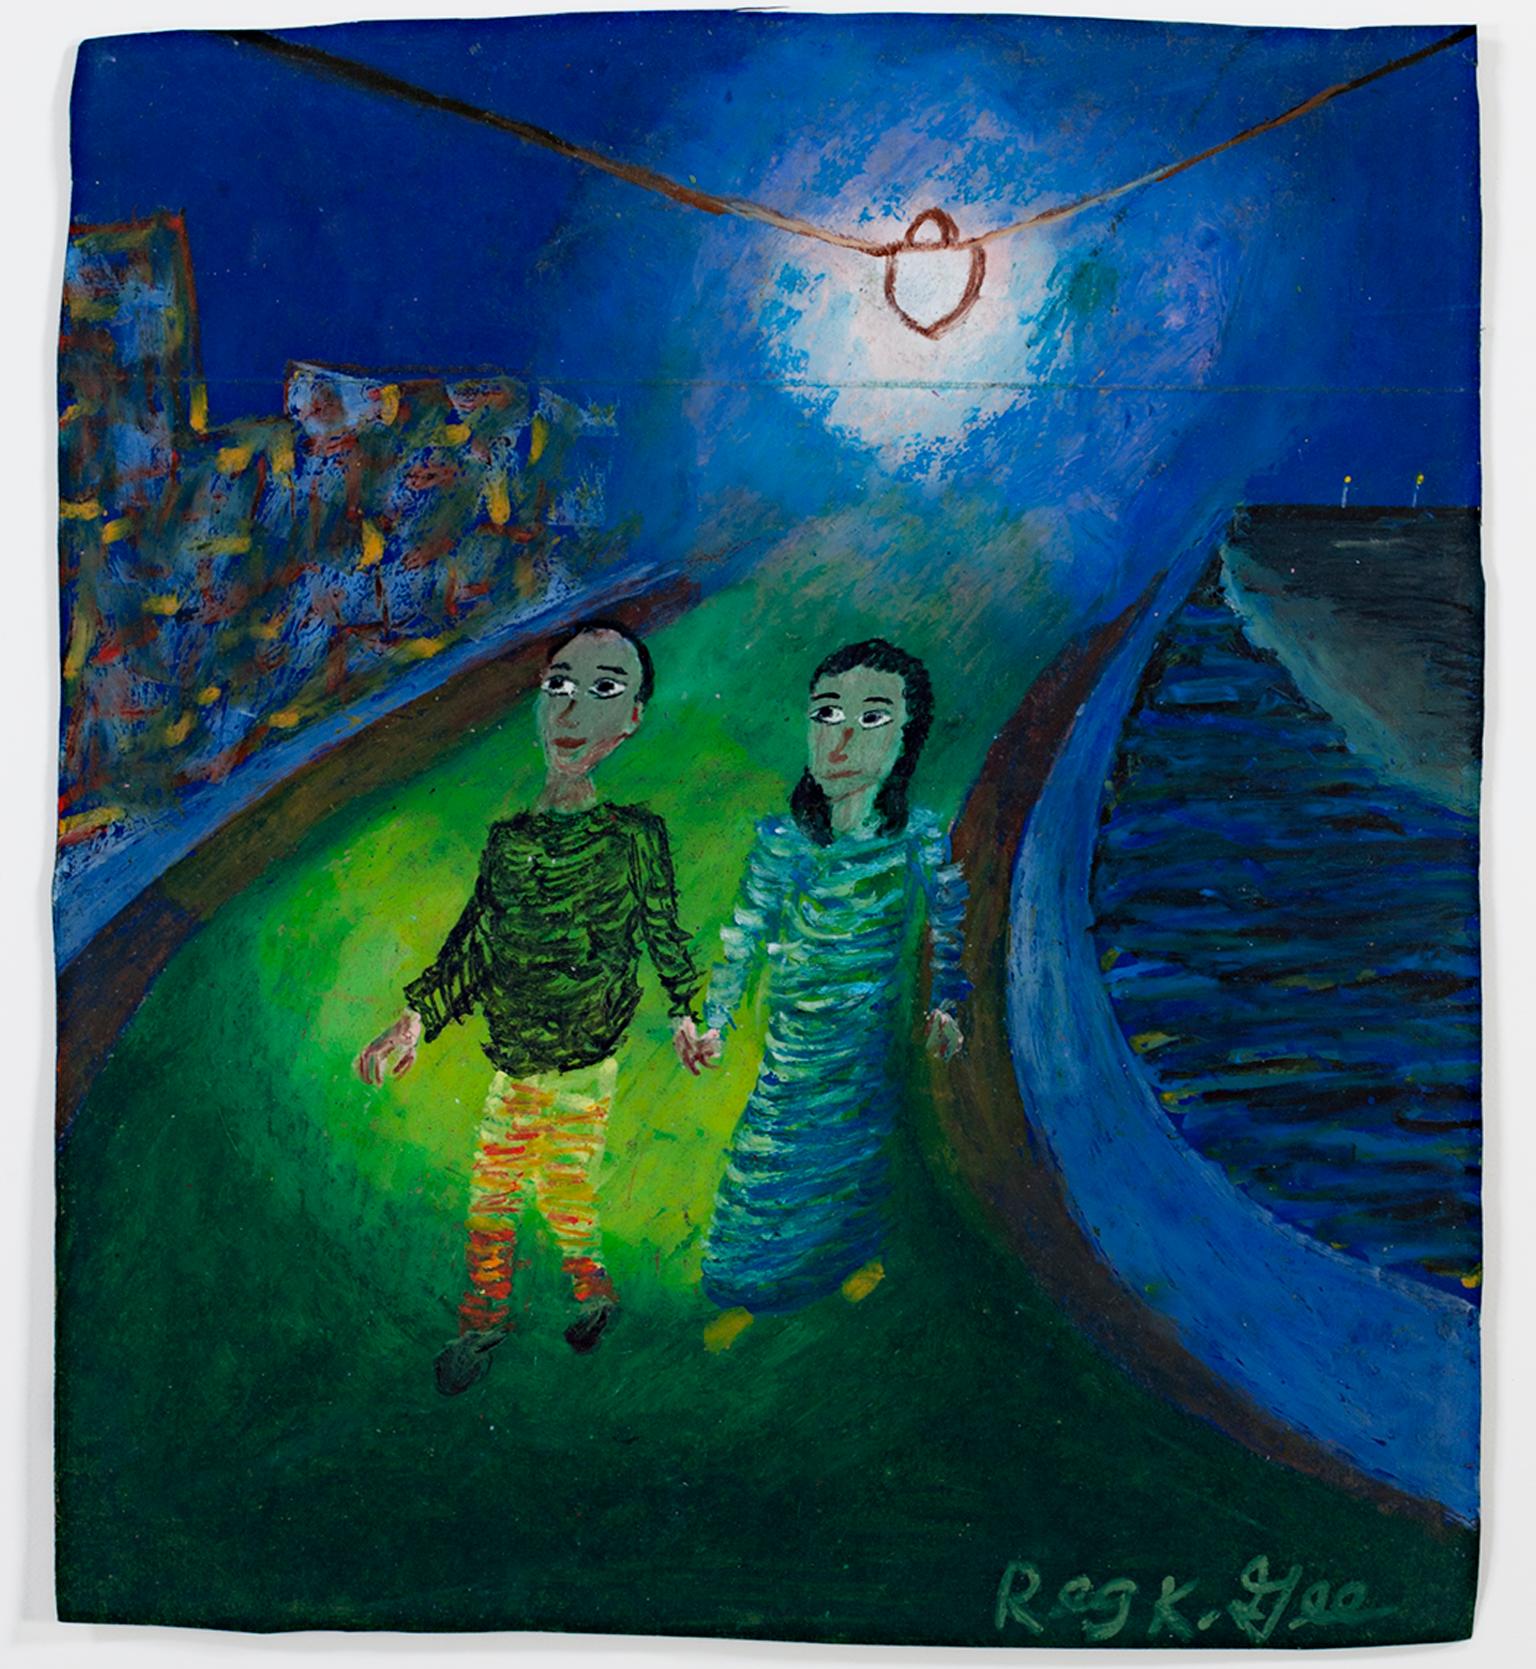 "Two Former Loners Now" is an original oil pastel on a grocery bag by Reginald K. Gee. The artist signed the piece lower right. It features two people walking towards the viewer in mostly green and blue. 

13 7/8" x 12" art
20 1/2" x 18 5/8"